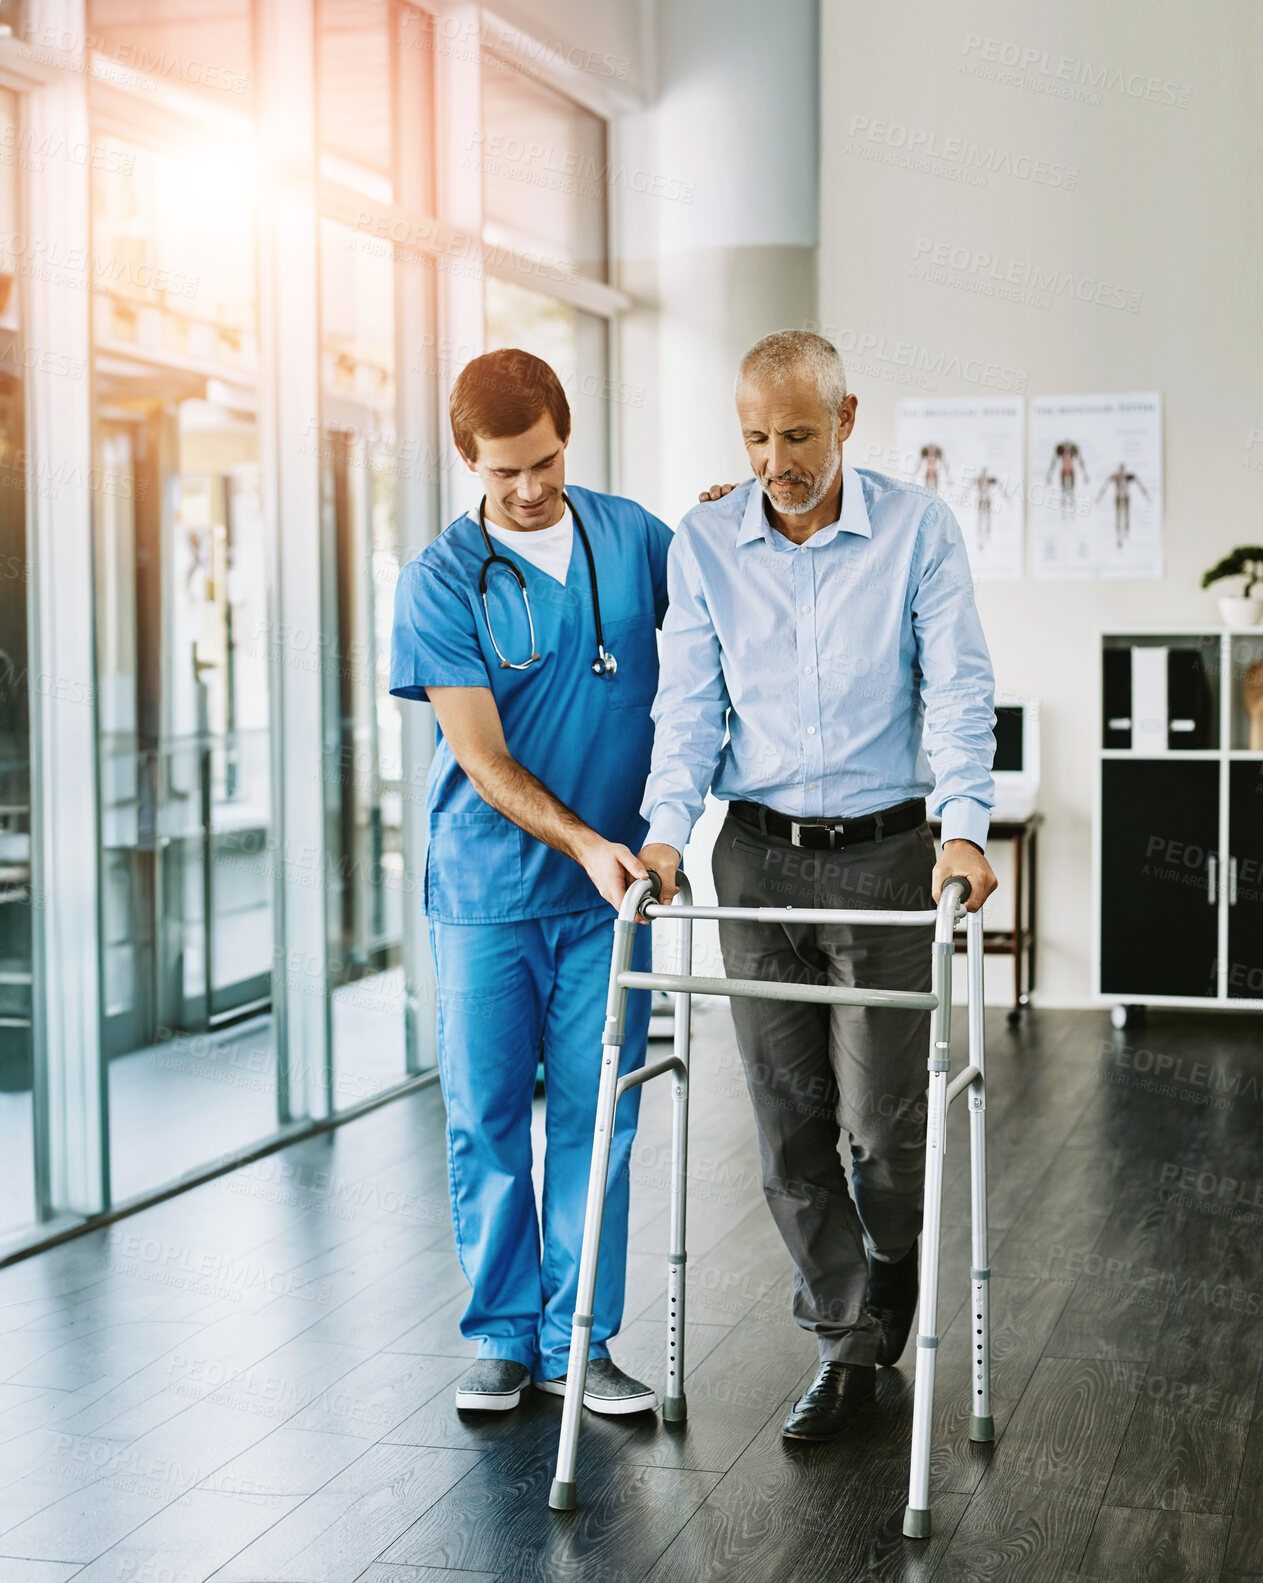 Buy stock photo Physiotherapist, senior man and walking frame with help, balance and guide for steps in hospital. Doctor, elderly person and mobility aid for recovery, rehabilitation and support with care at clinic